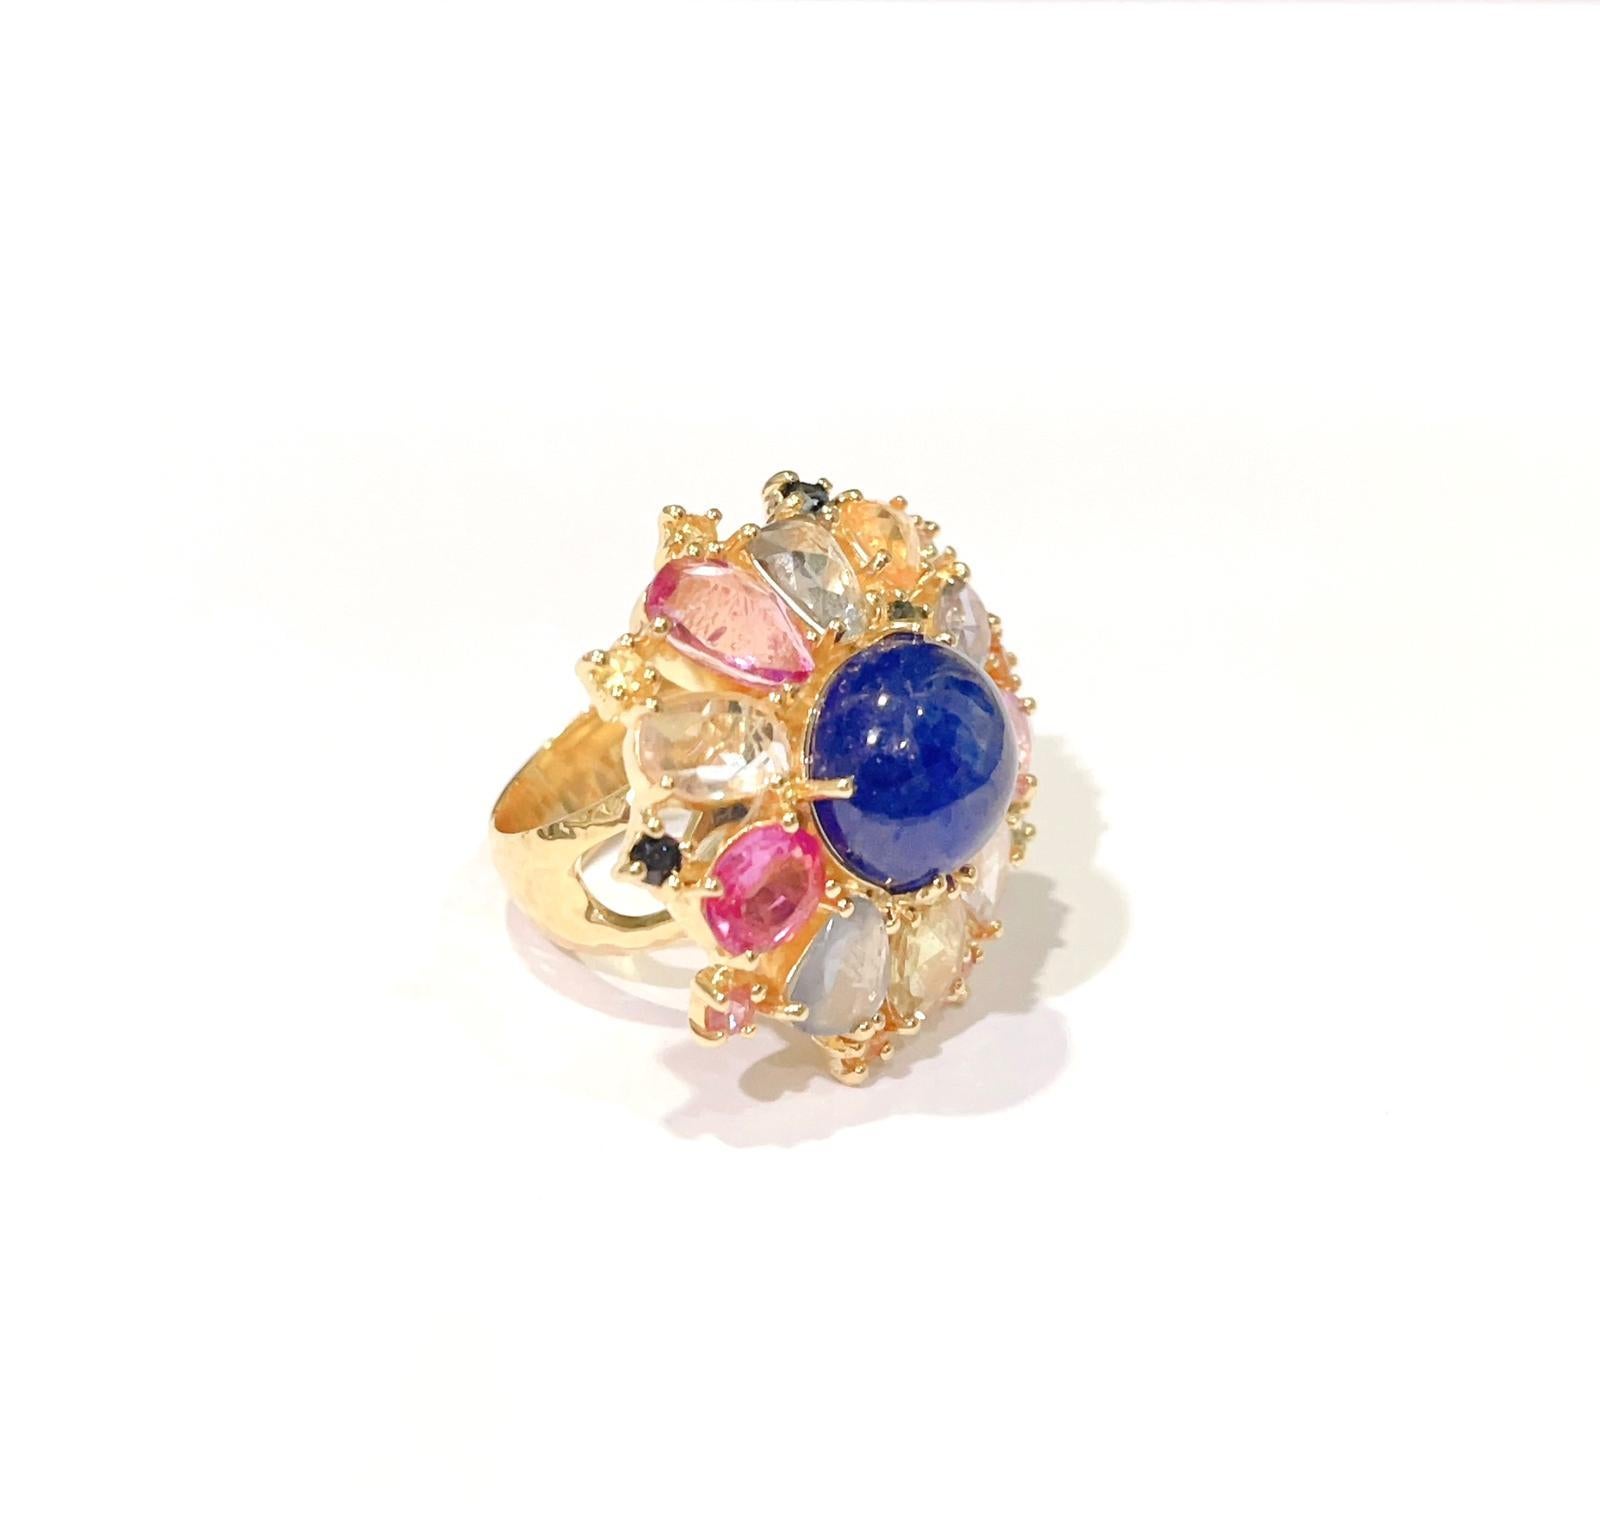 Baroque Bochic “Capri” Blue & Rose Cut Sapphires Cocktail Ring Set in 18k Gold & Silver For Sale